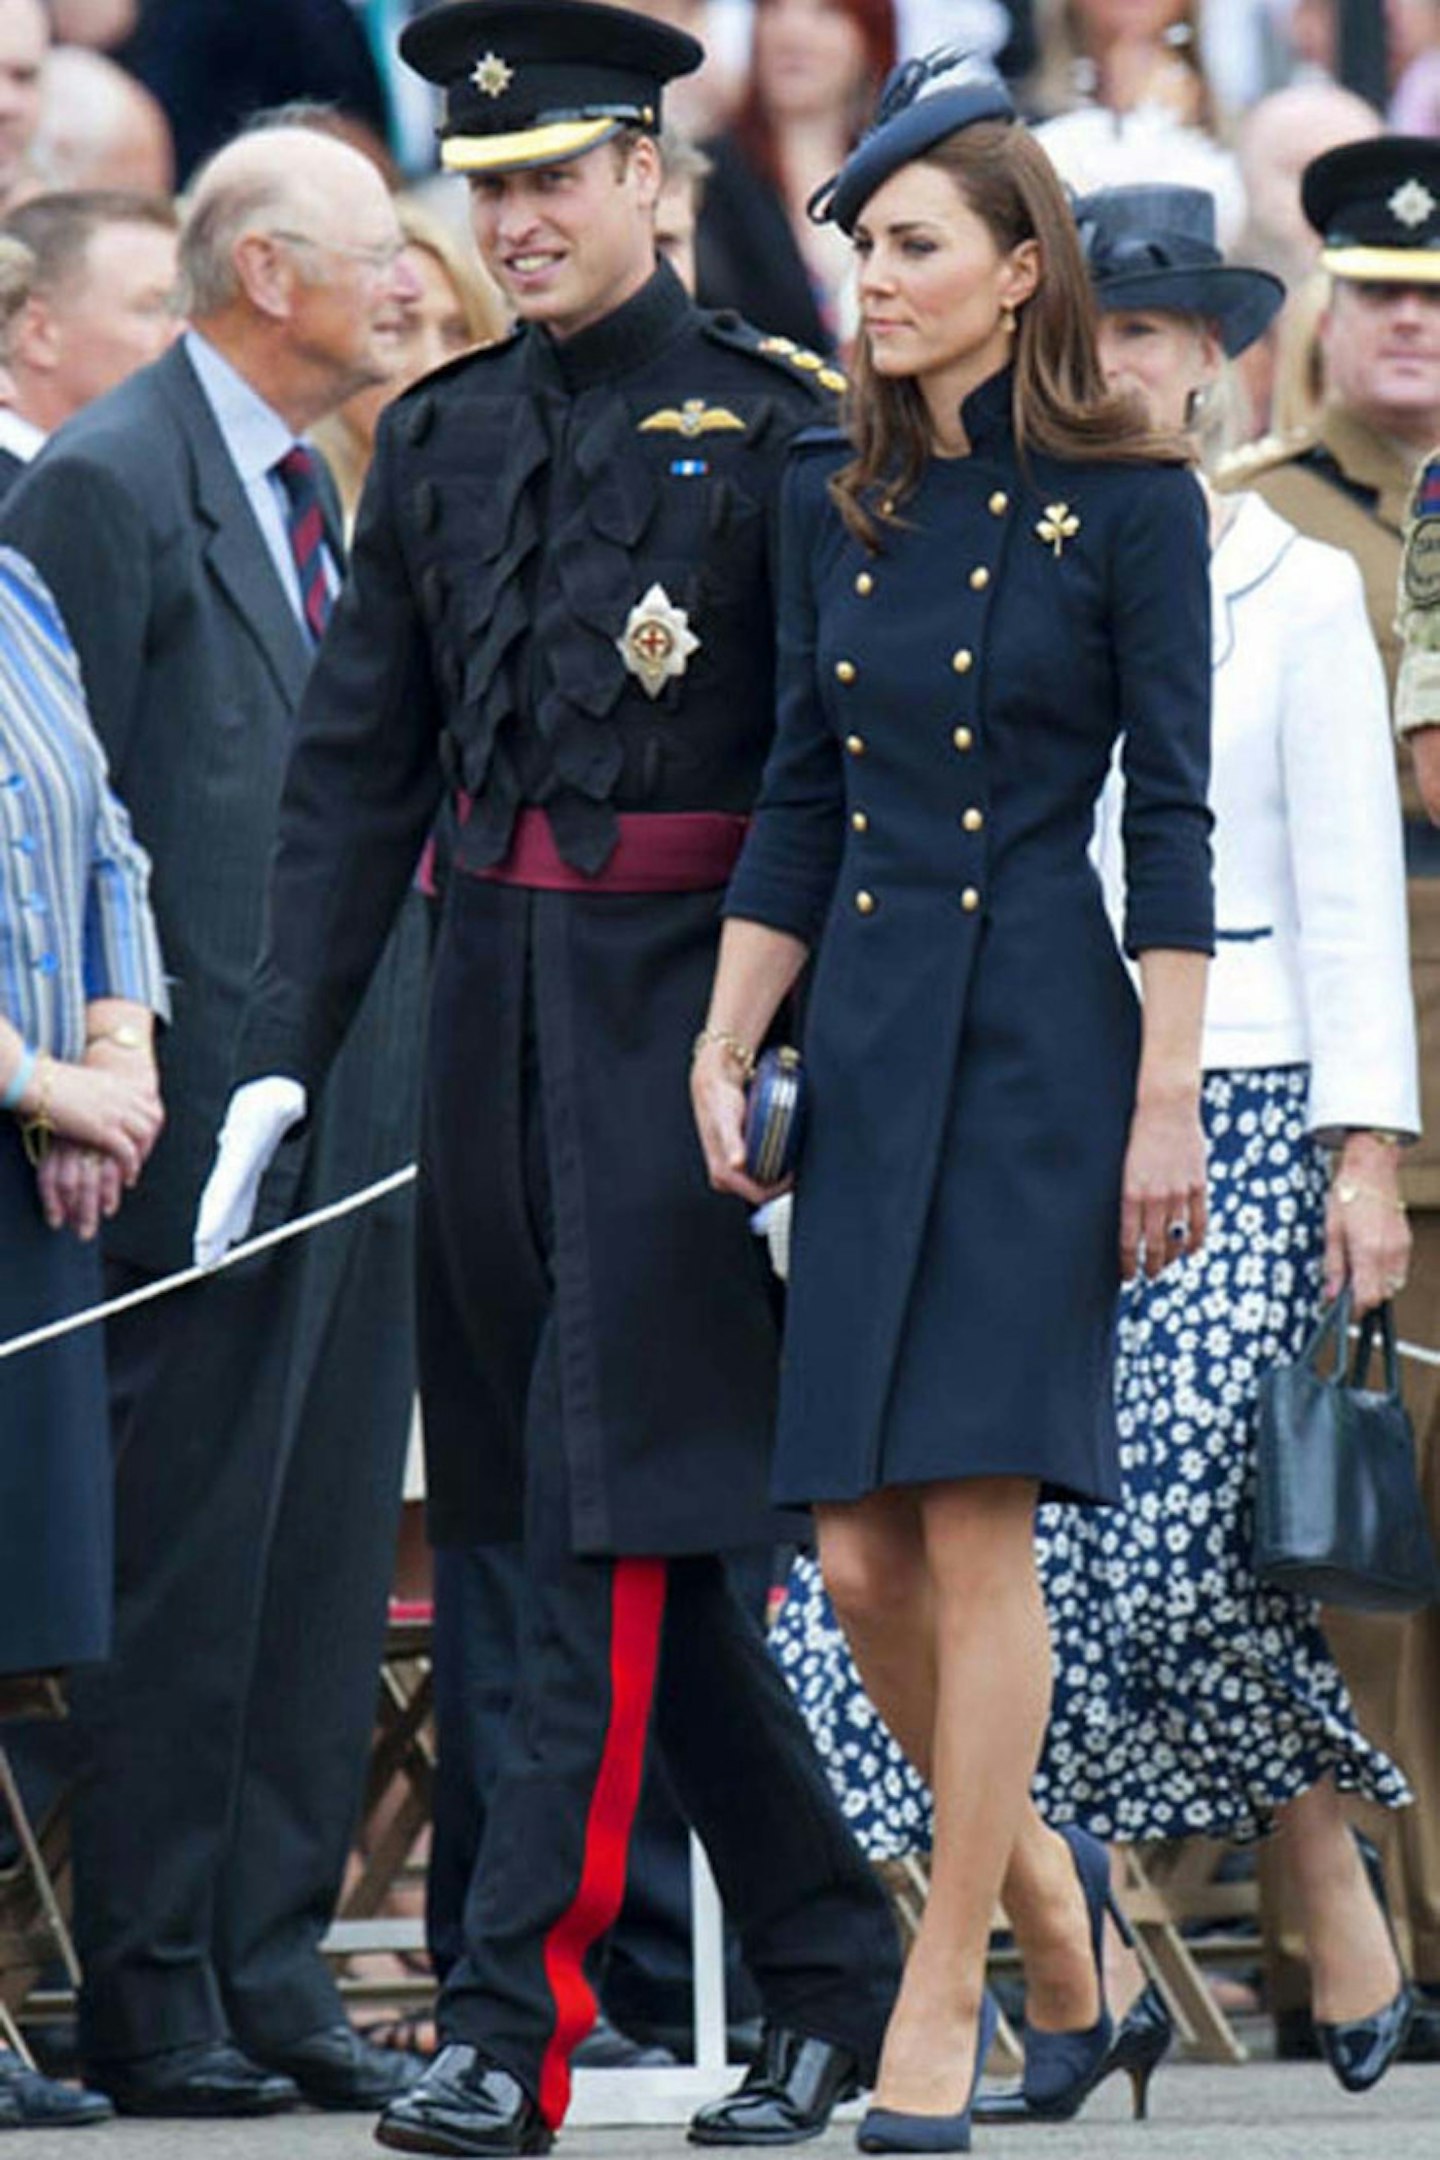 Kate Middleton wears Alexander Mcqueen coat for the presentation of service medals to members of the Irish Guards, Windsor's Victoria Barracks, June 2011